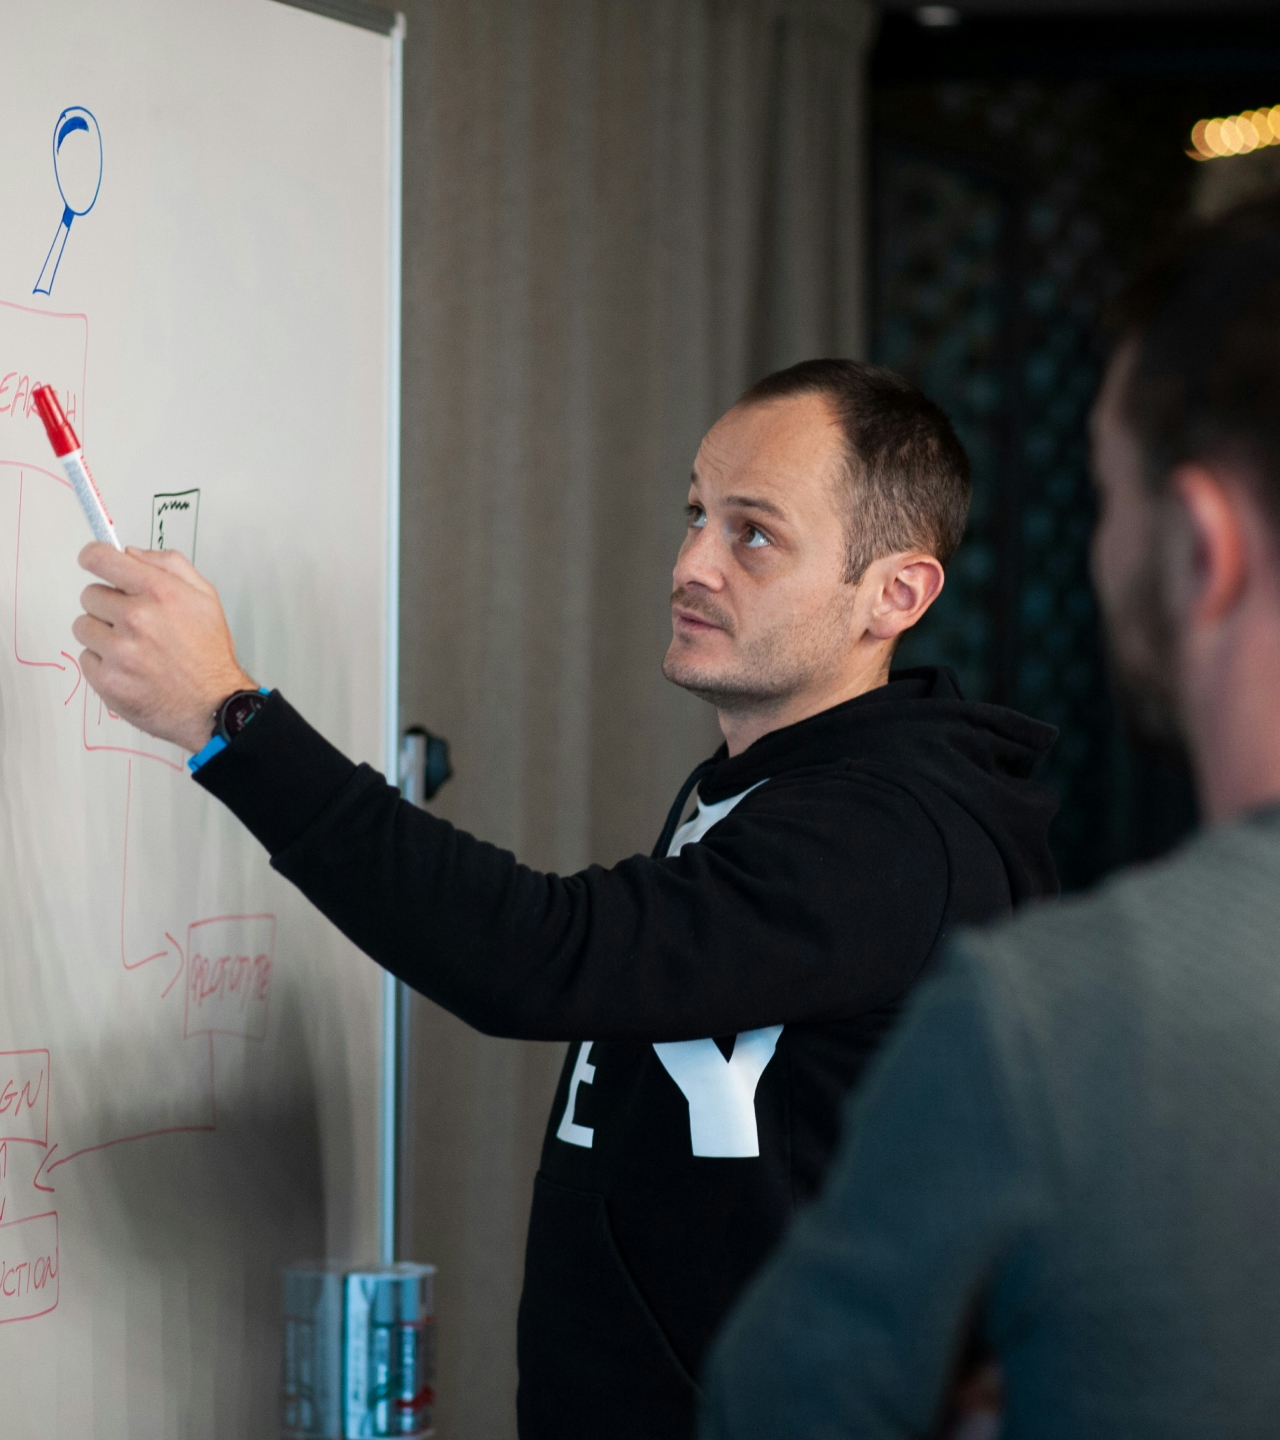 A man explaining something in front of a whiteboard